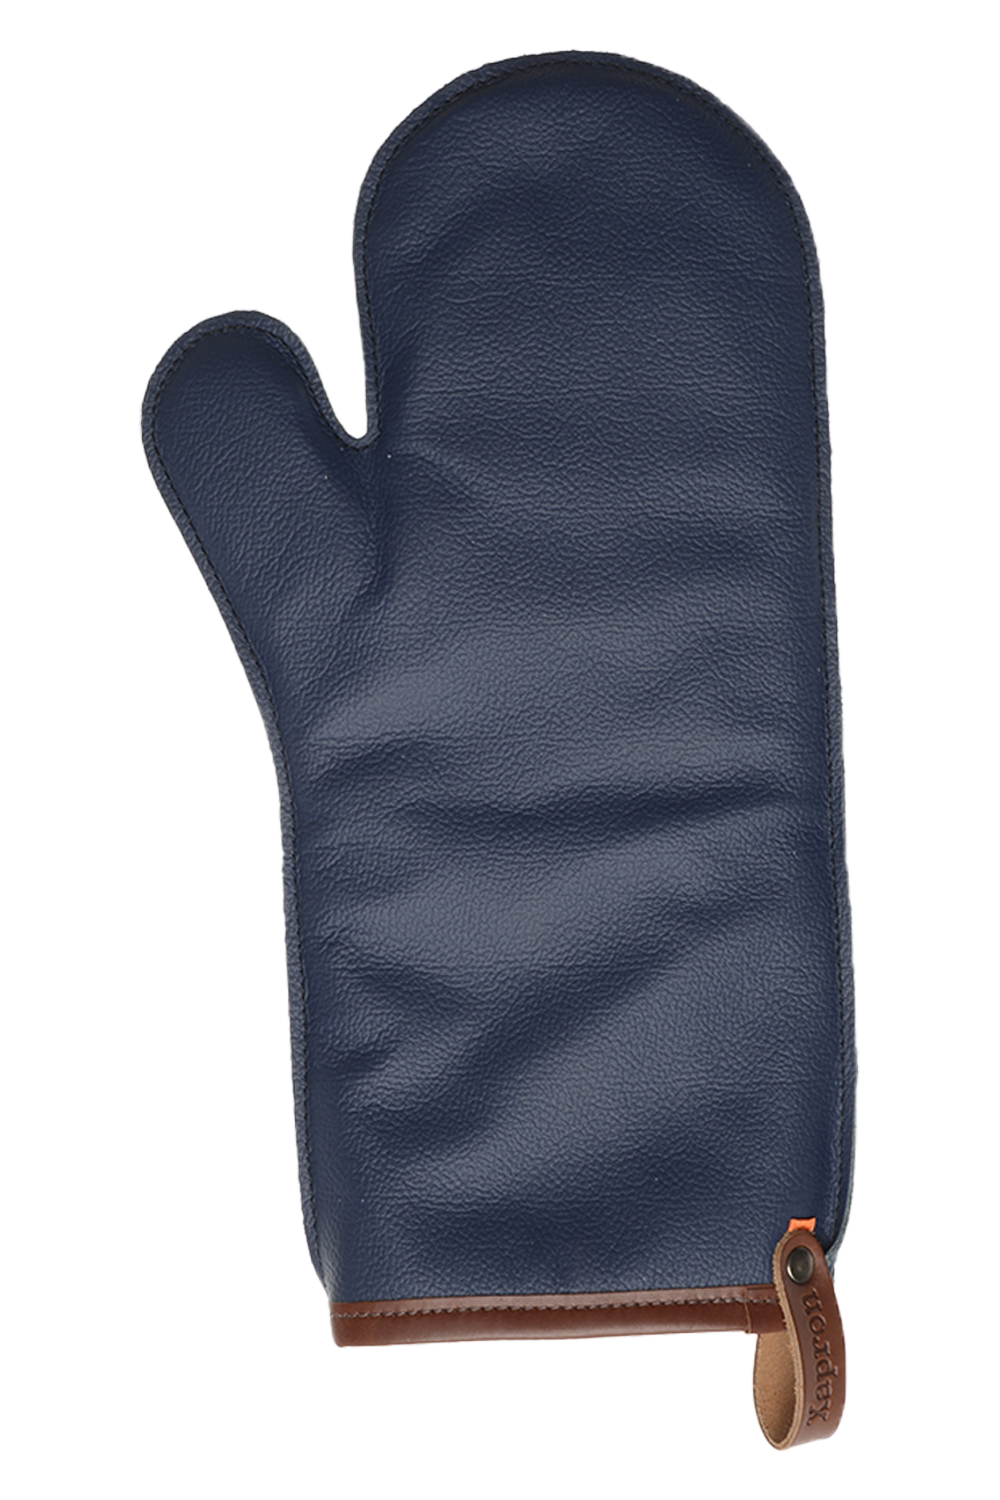 Oven Glove Large